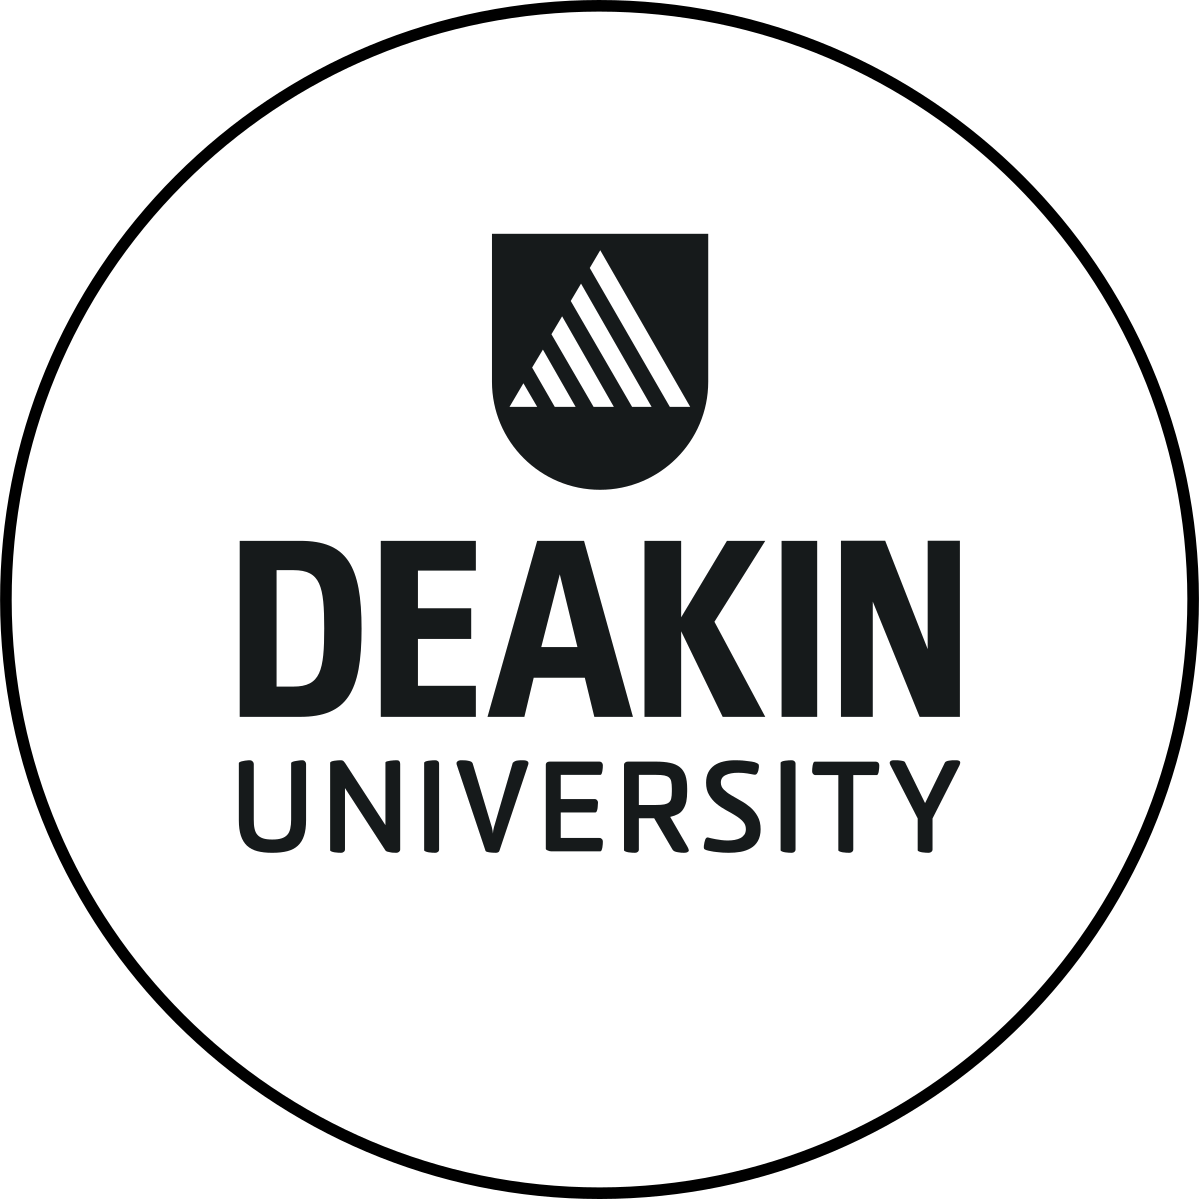 Graduate Certificate of Writing and Literature | Graduate diploma / certificate | Humanities & Culture | Blended Learning | 6 months | Deakin University | Australia